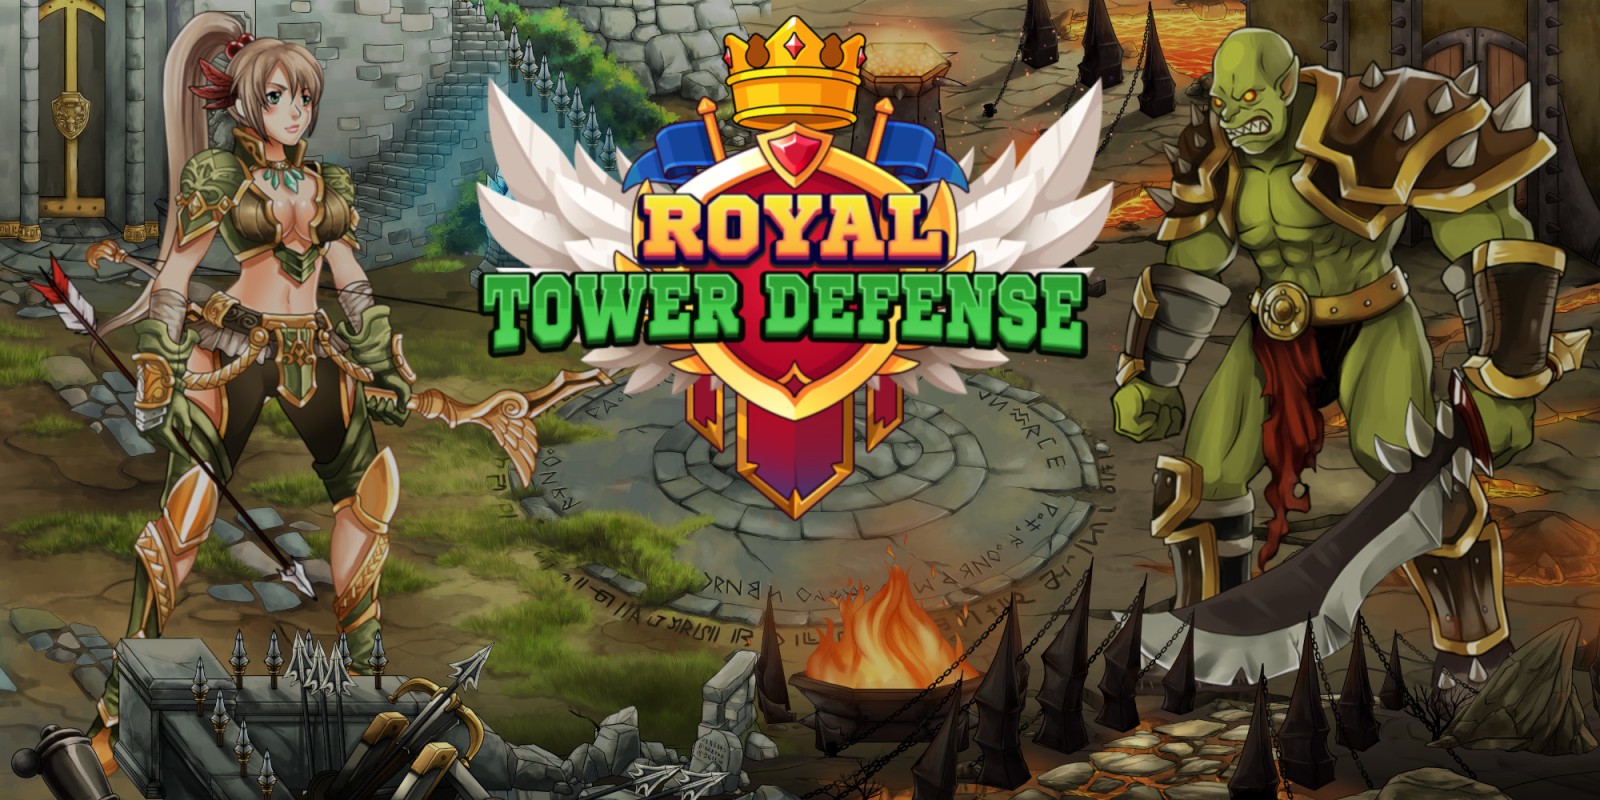 https://cdn03.nintendo-europe.com/media/images/10_share_images/games_15/nintendo_switch_download_software_1/H2x1_NSwitchDS_RoyalTowerDefense_image1600w.jpg